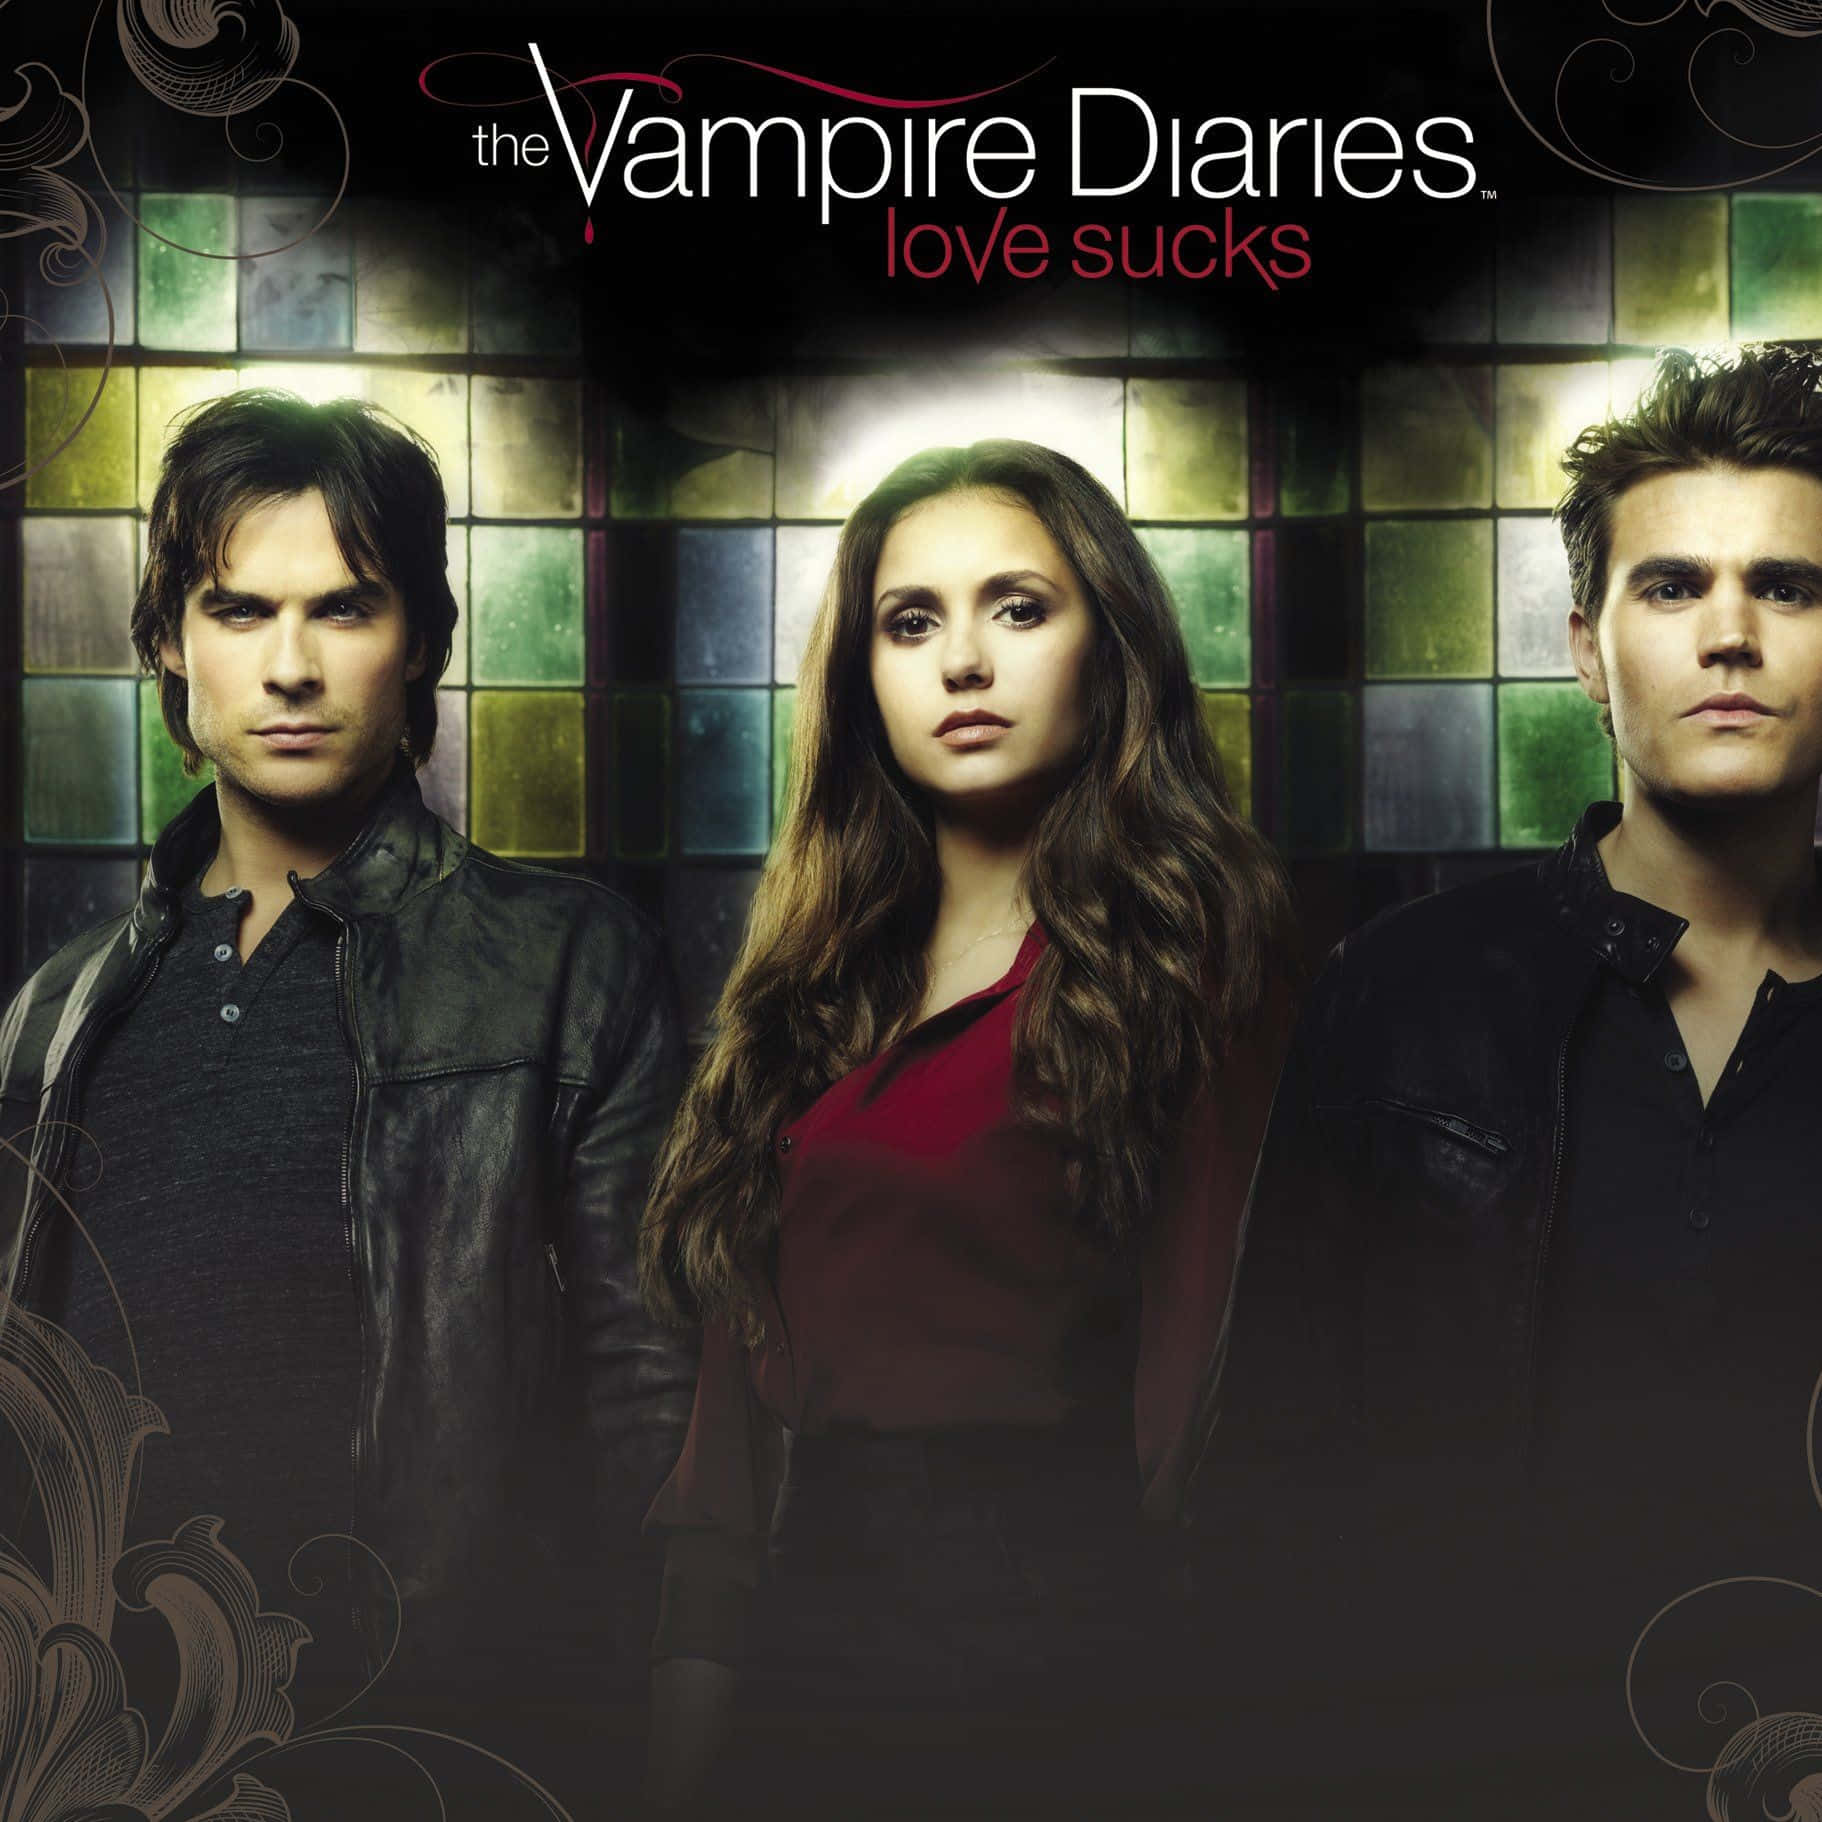 Get Your Hands on The Vampire Diaries Iphone Wallpaper